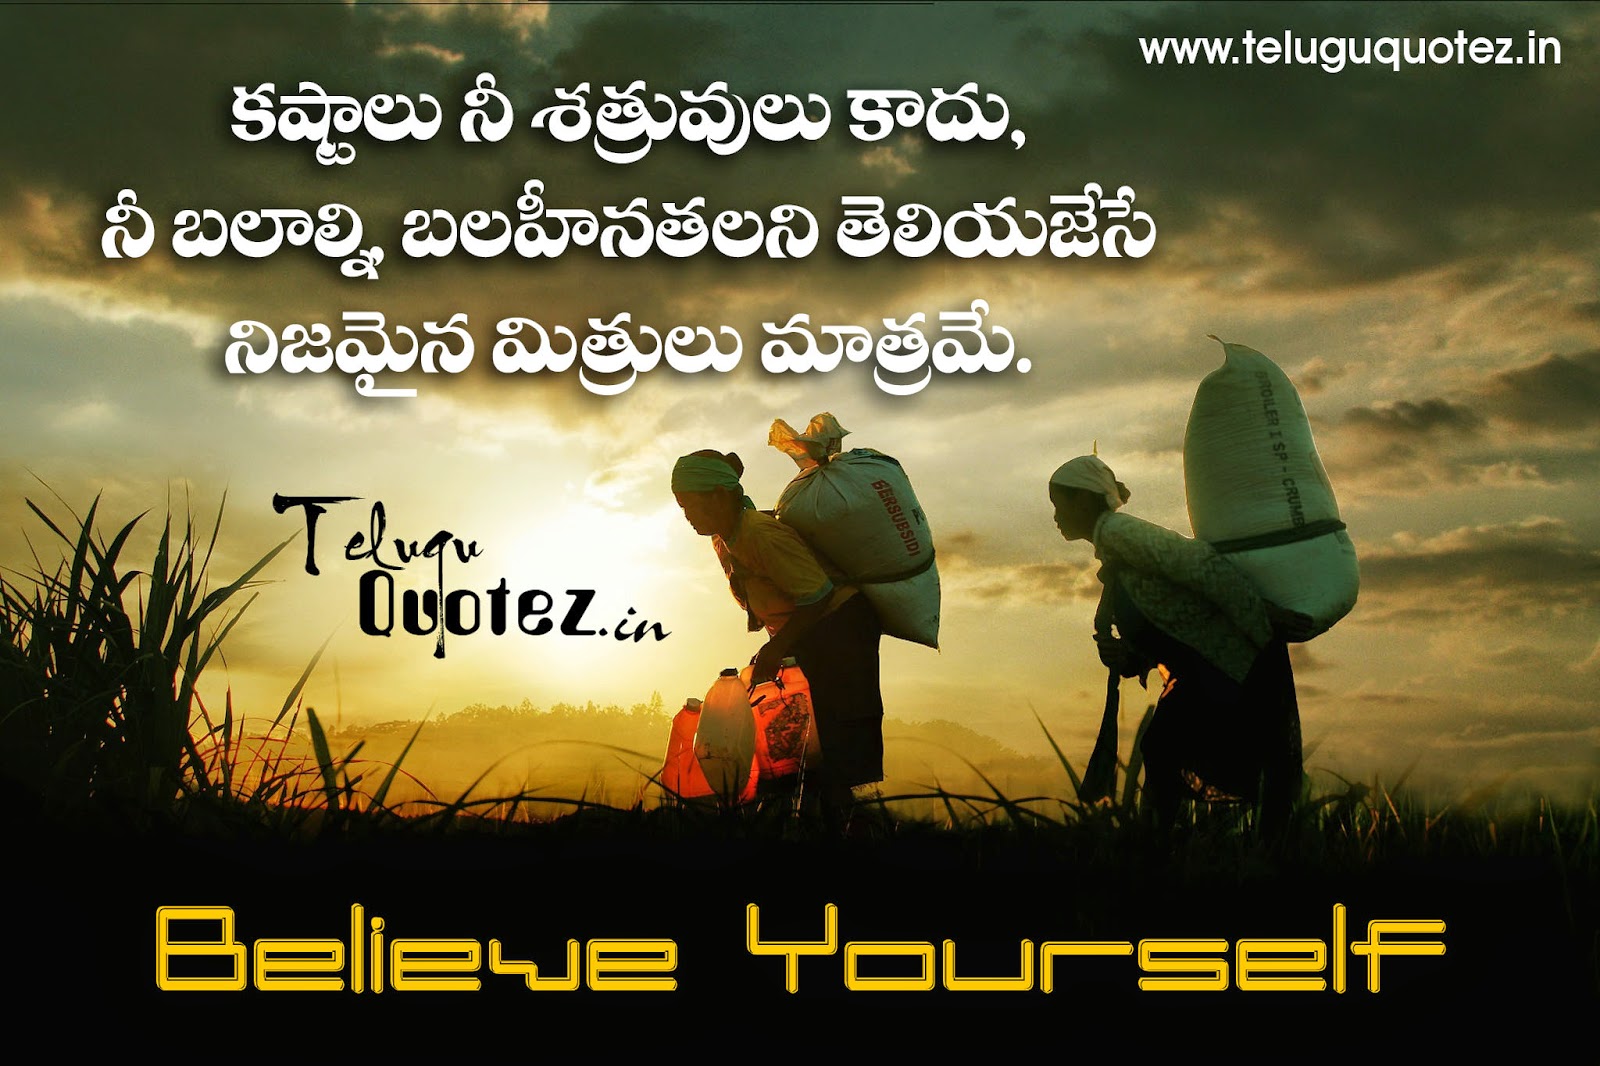 motivational picture telugu quotes on life | naveengfx